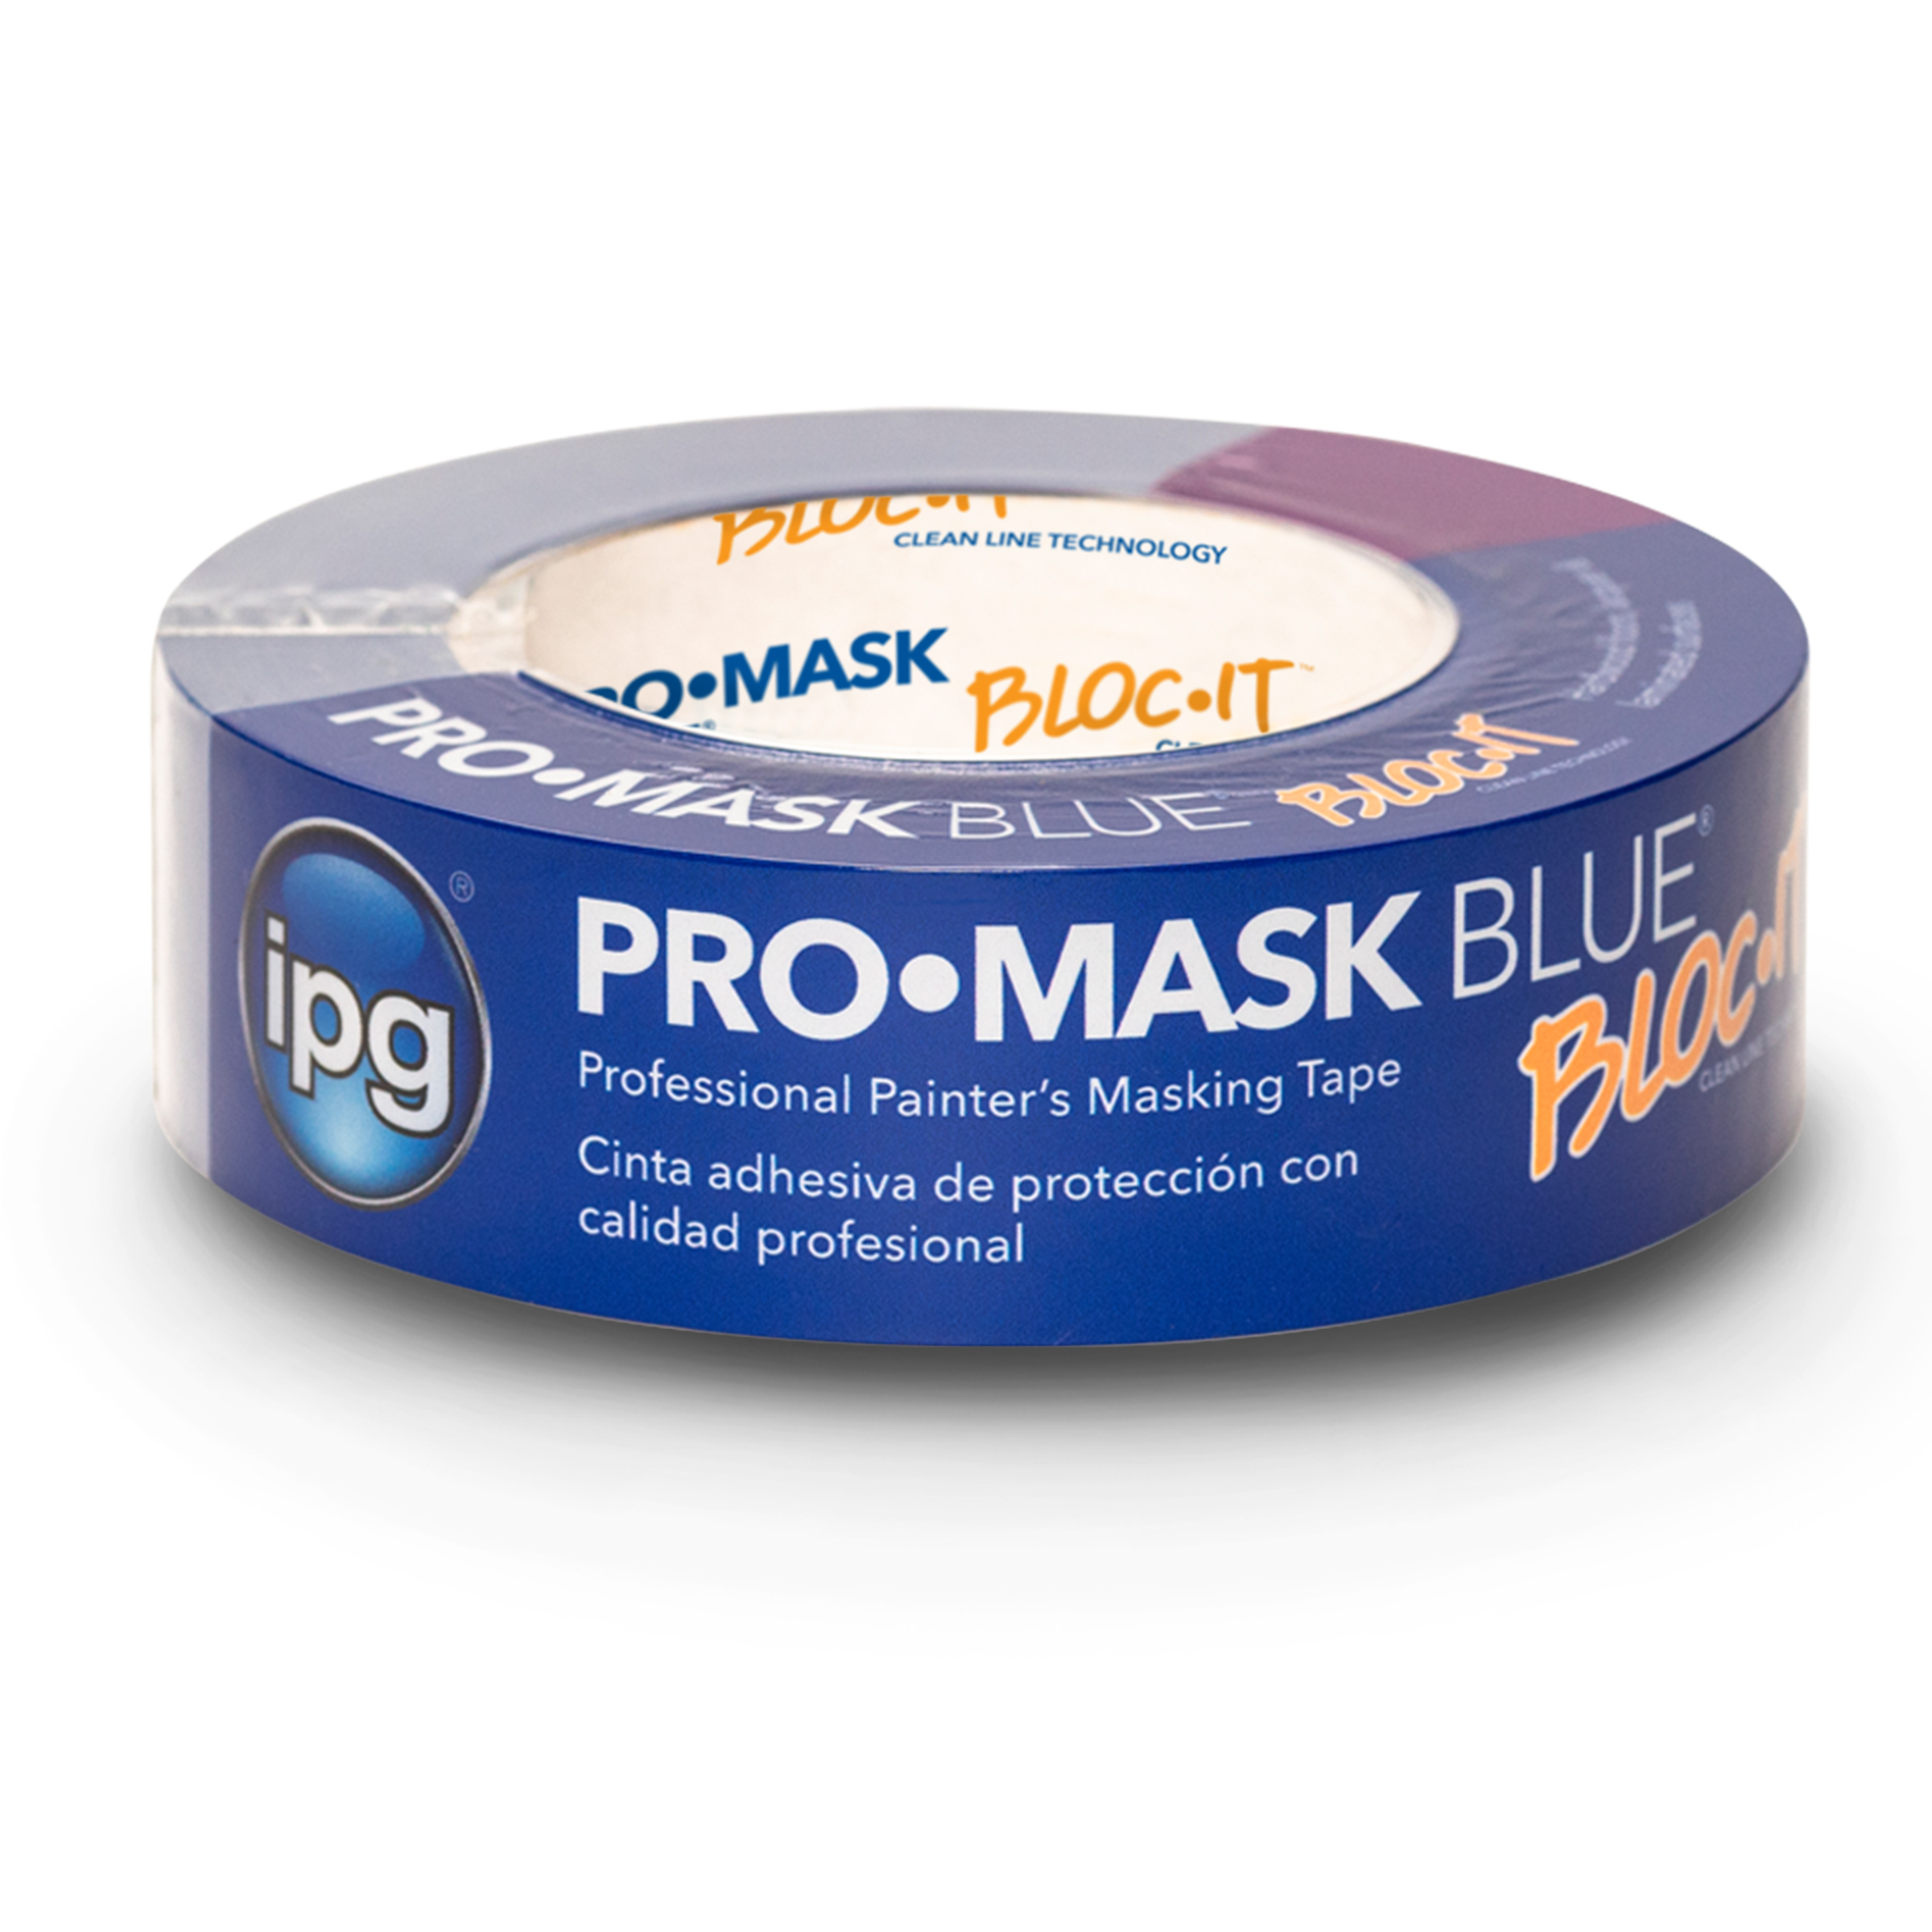 ProMask Blue with Bloc-It - IPG